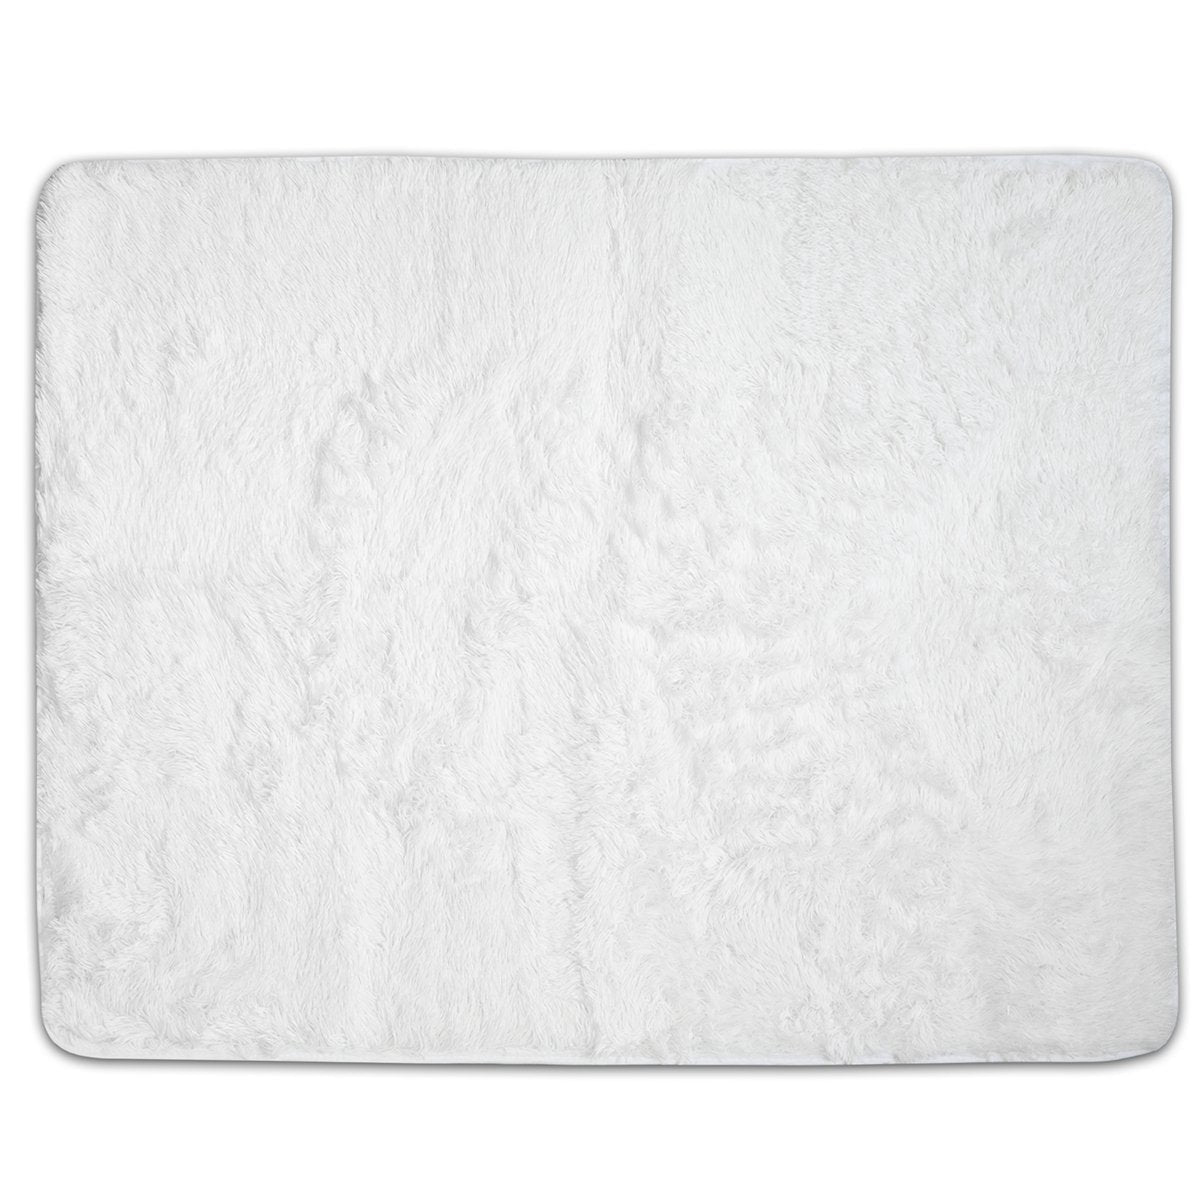 Faux Fur Rectangle Floor Area Rug 4Ft By 5Ft White - Top